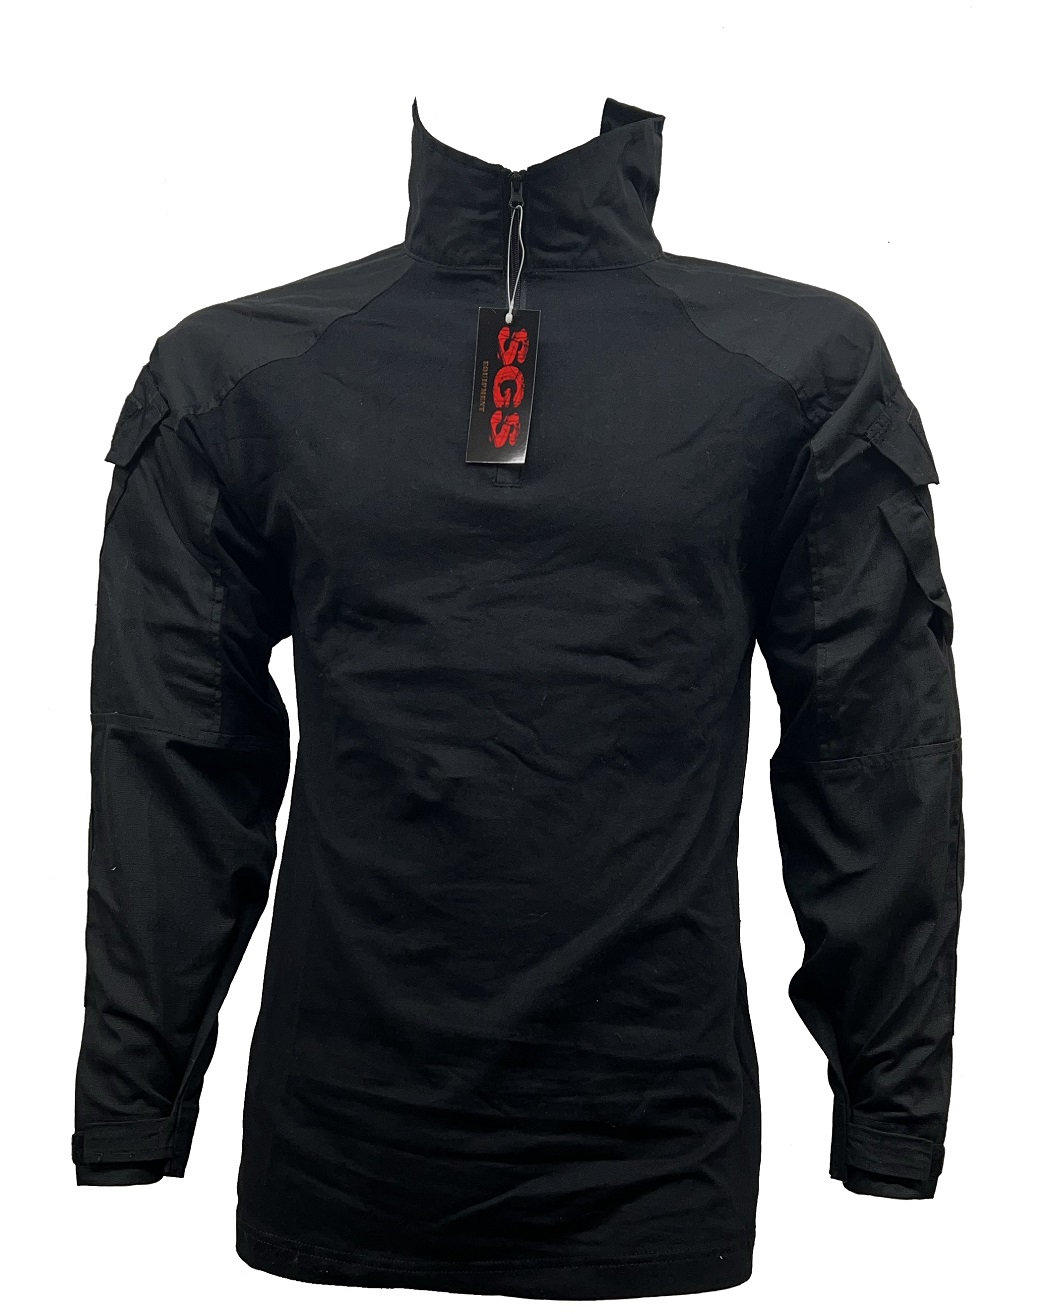 SGS black Tactical sweater